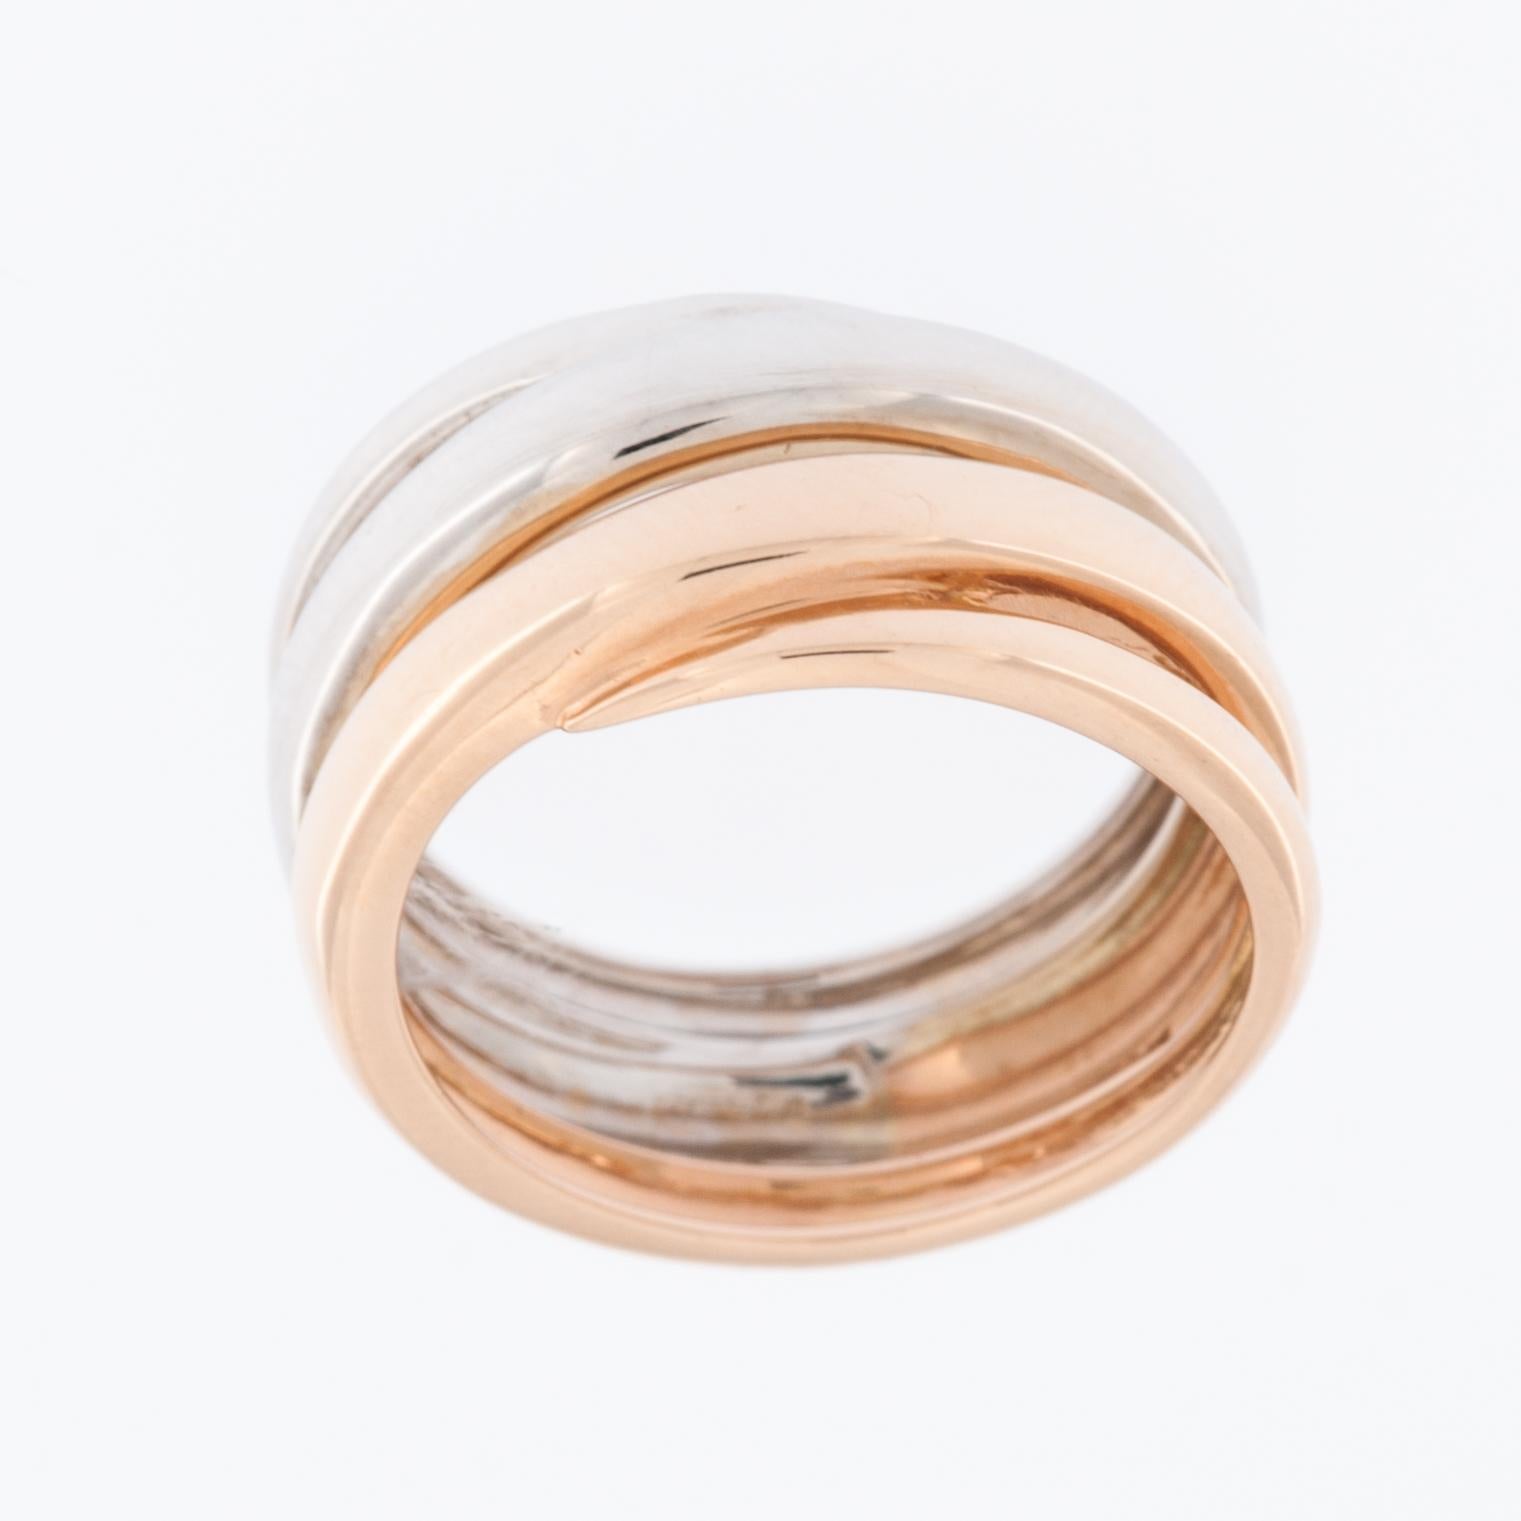 The Spiral Design 18kt White and Rose Gold Ring is a stunning piece of jewelry that combines elegance and sophistication with a unique and eye-catching design. 

The ring is crafted from 18-karat white gold. This high-quality gold alloy is known for